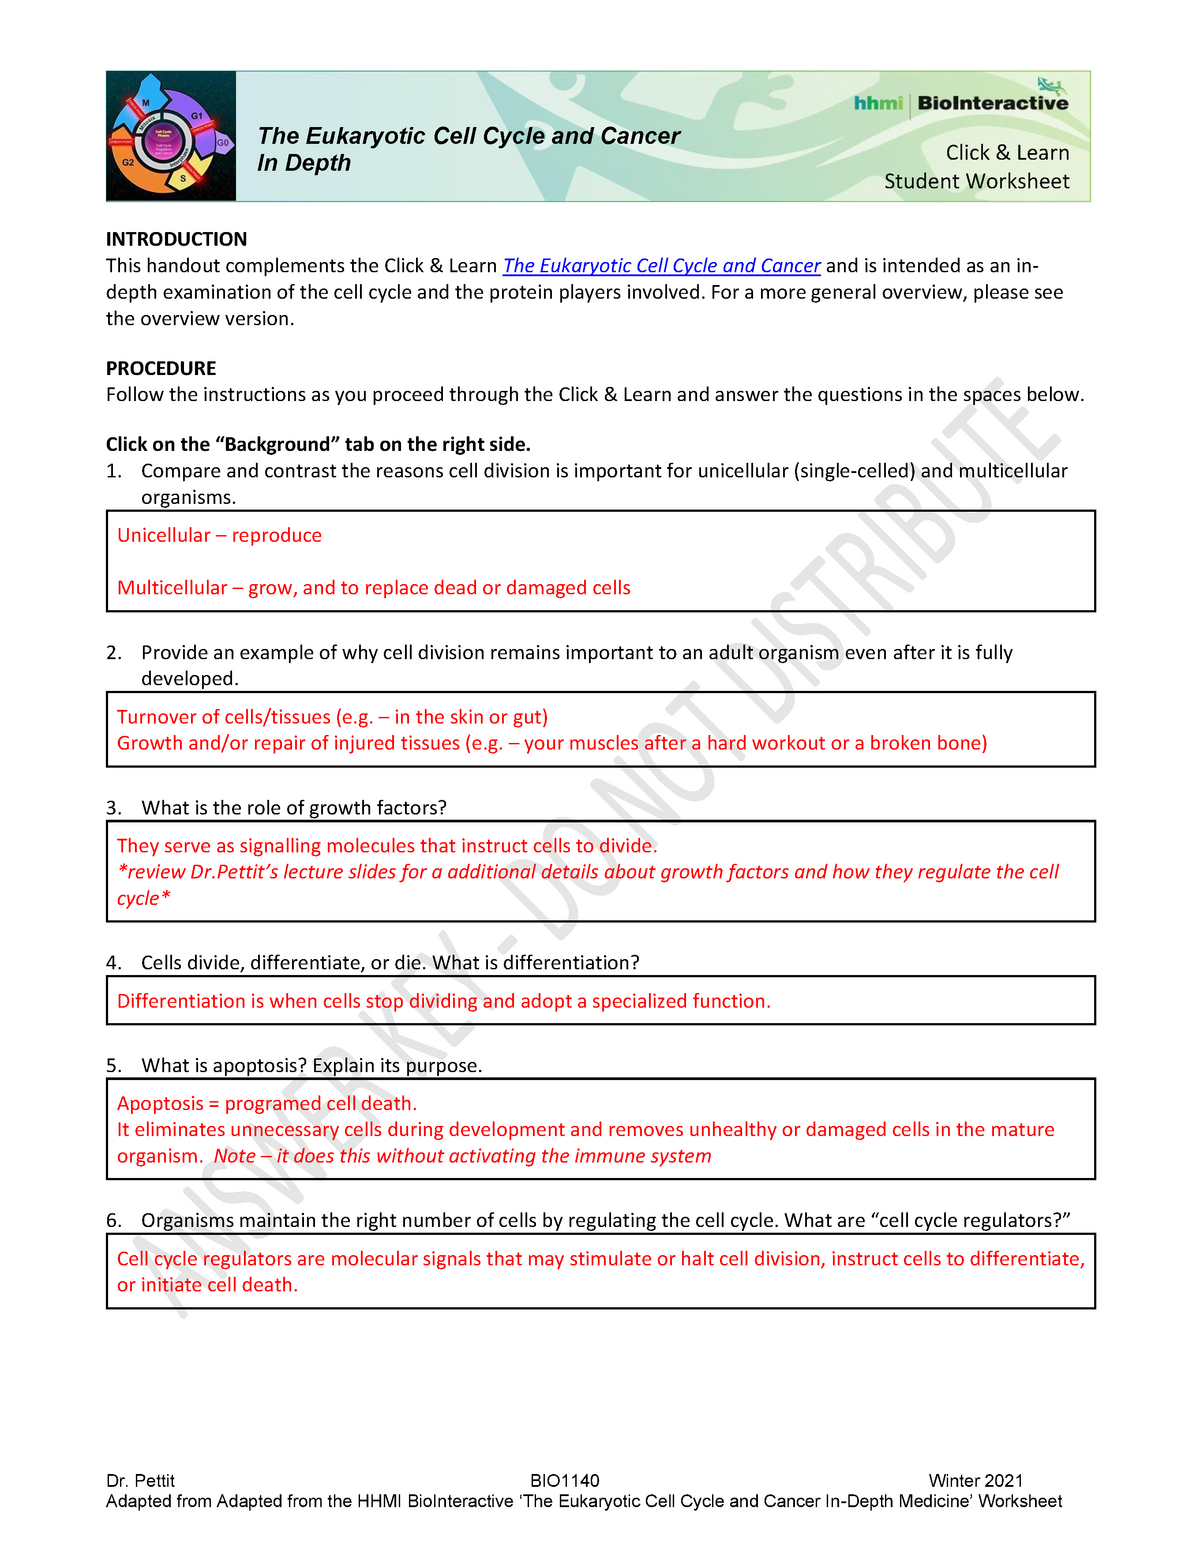 topic-6-eukaryotic-cell-cycle-and-cancer-exploration-worksheet-answer-key-dr-pettit-bio1140